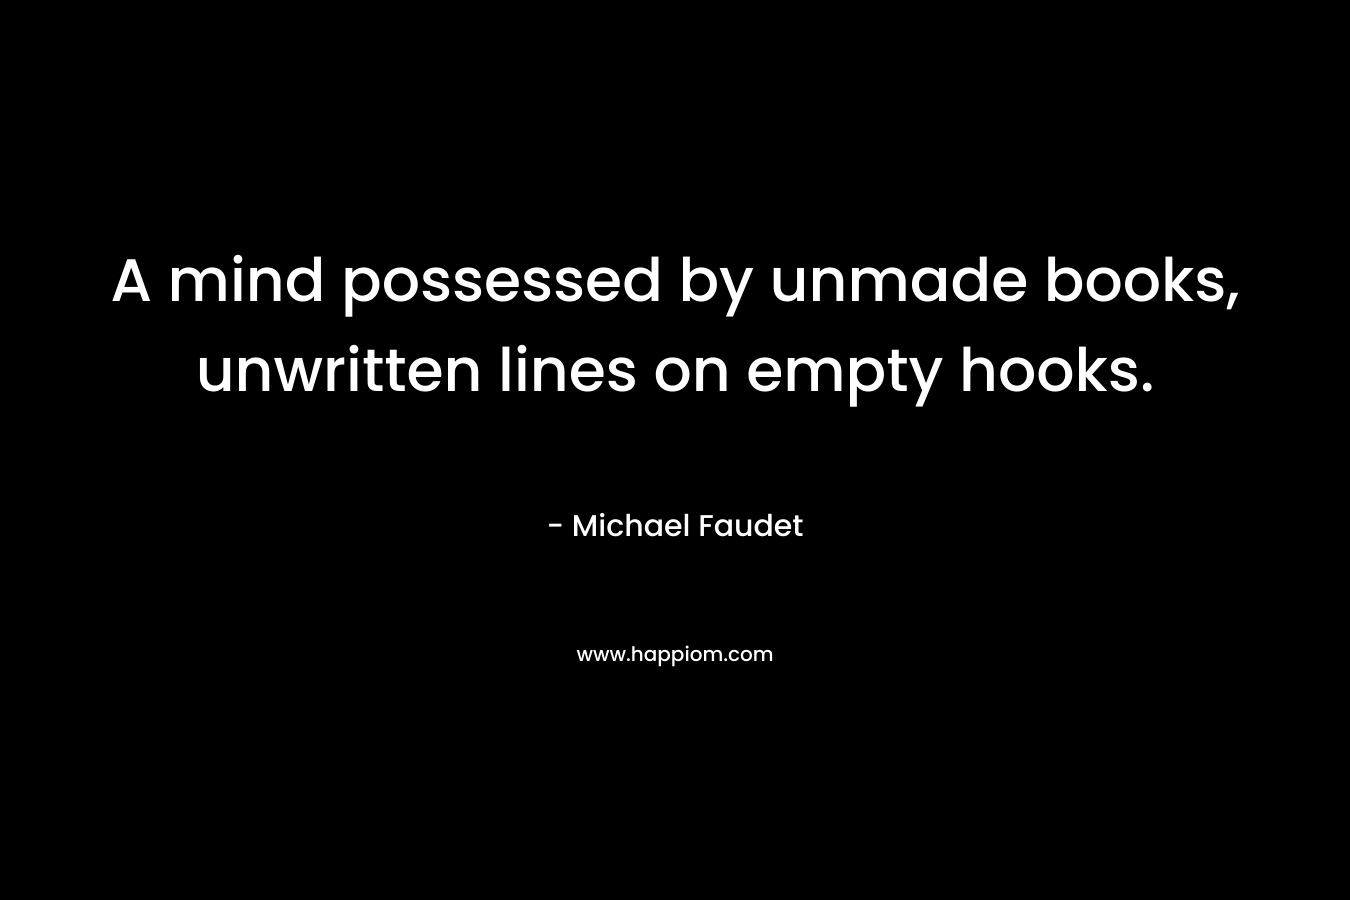 A mind possessed by unmade books, unwritten lines on empty hooks.